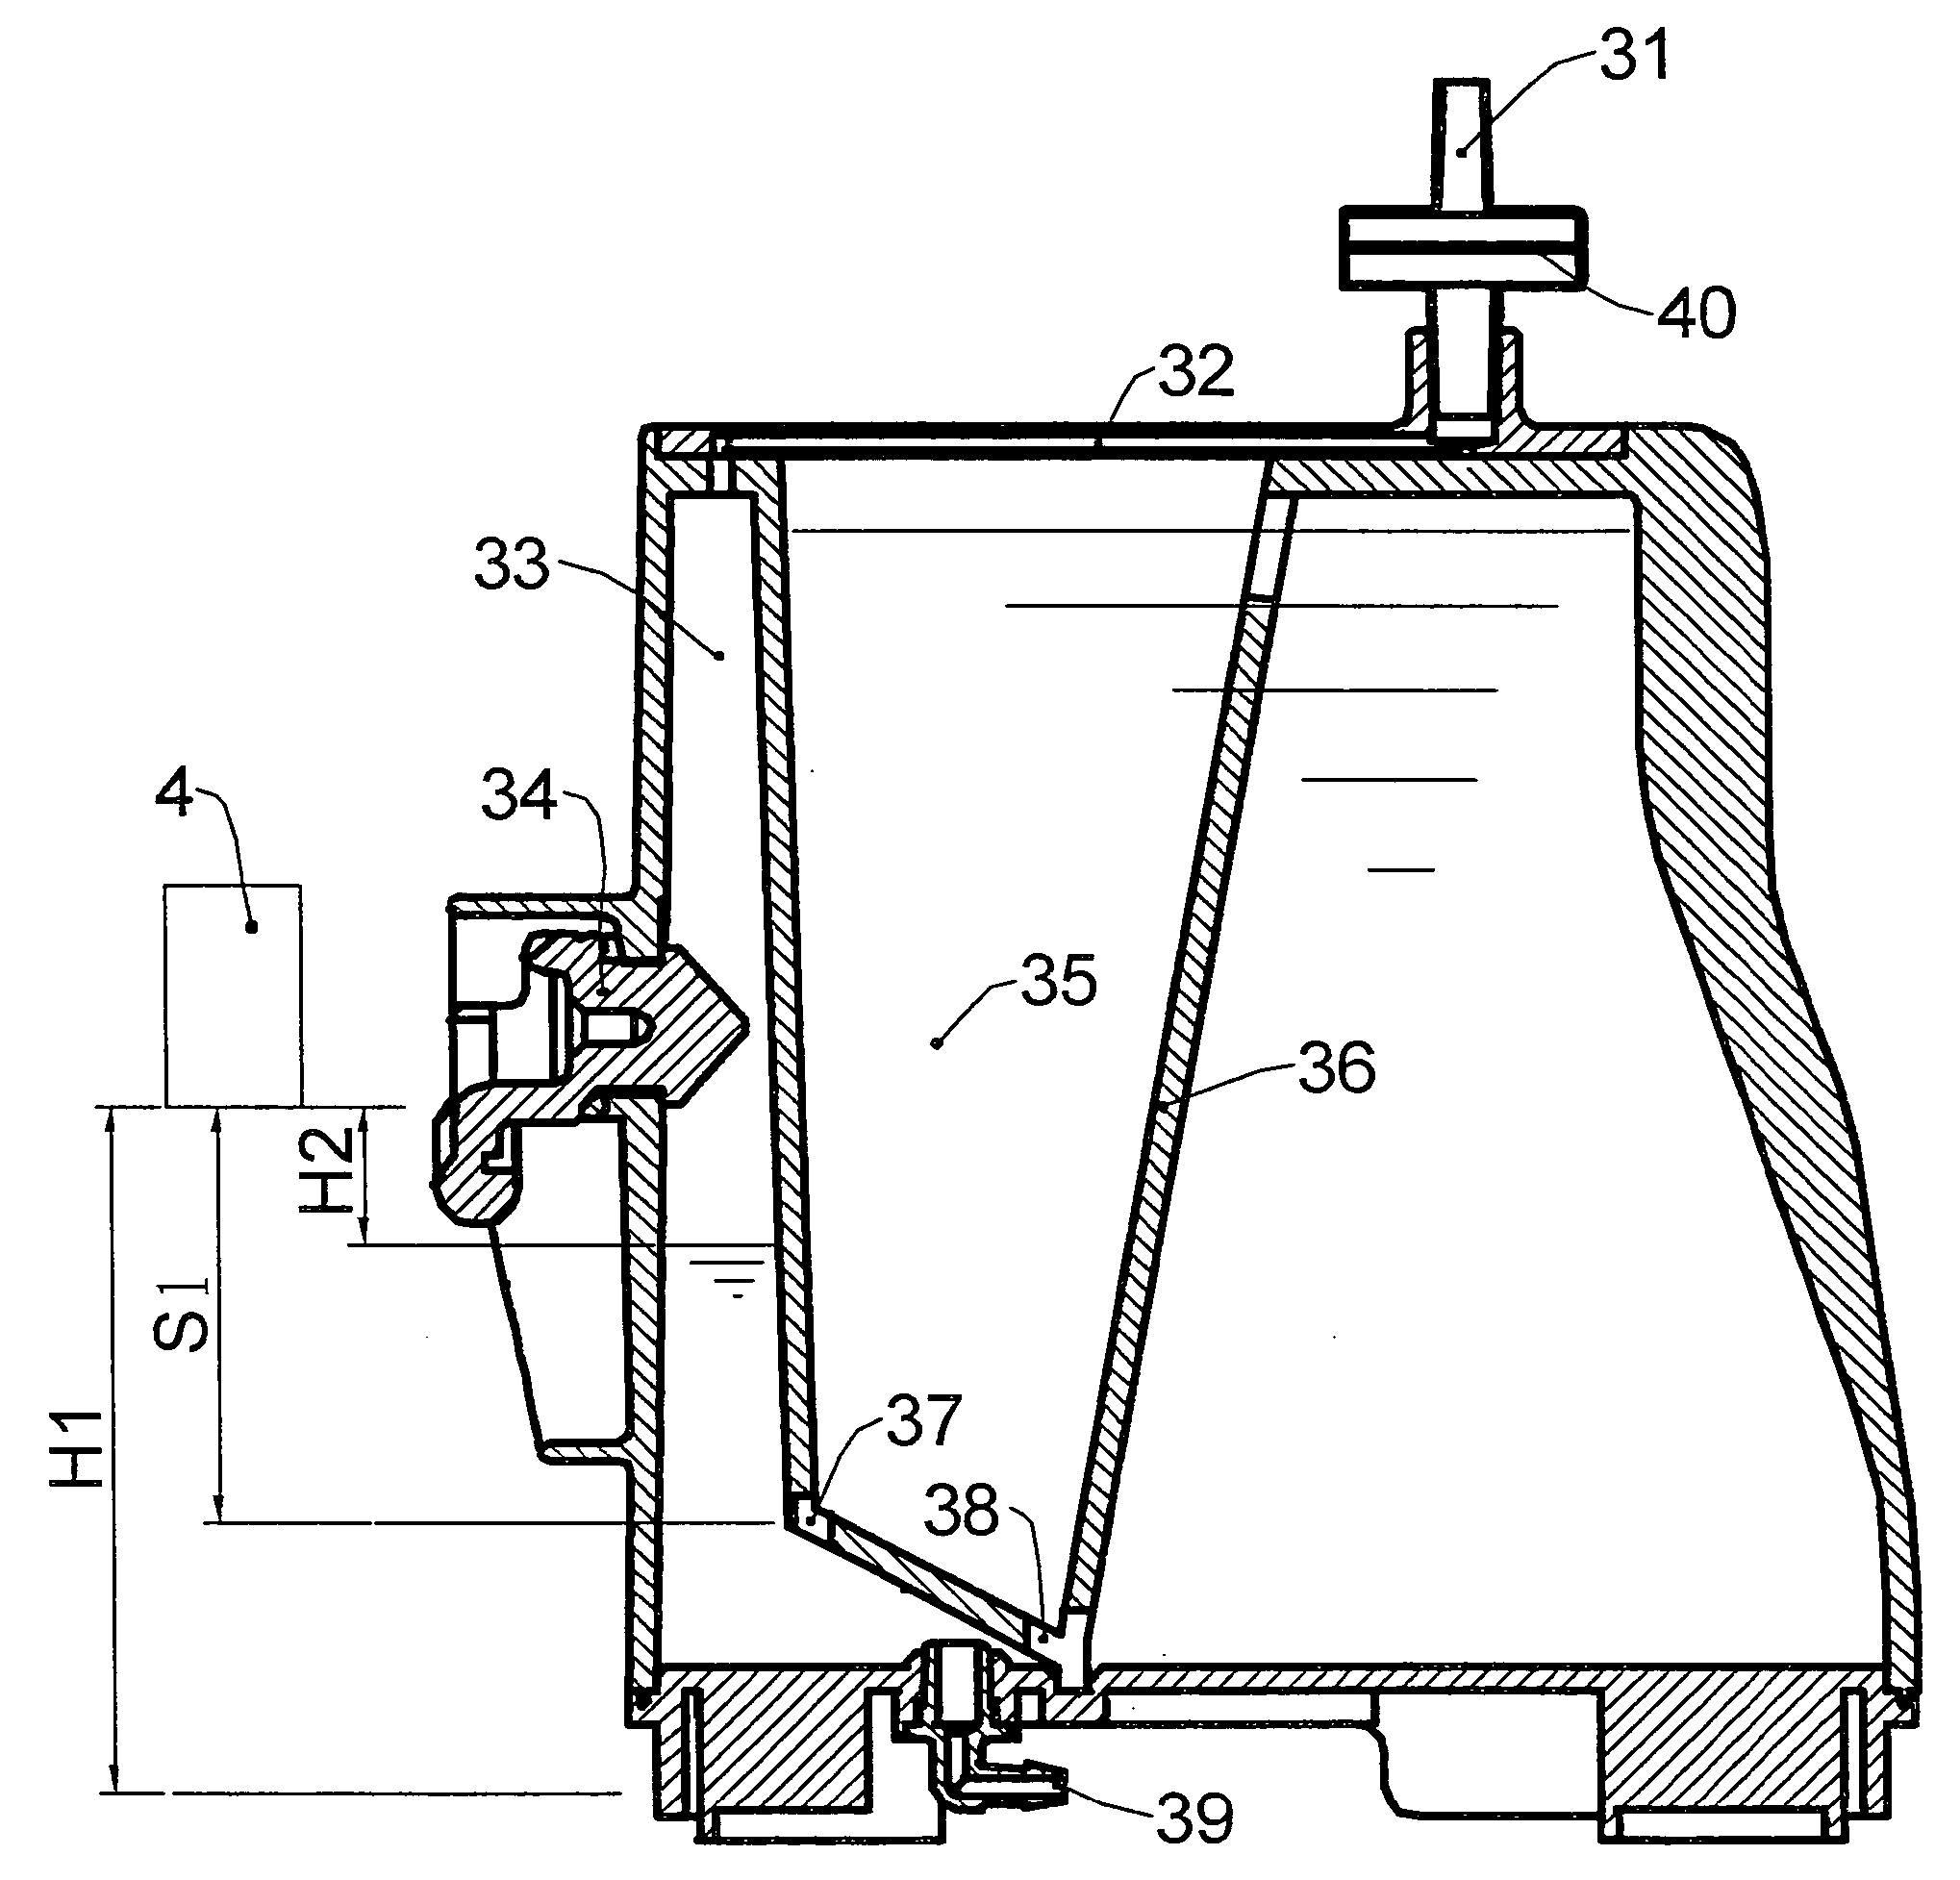 Device for continuously supplying ink under constant pressure